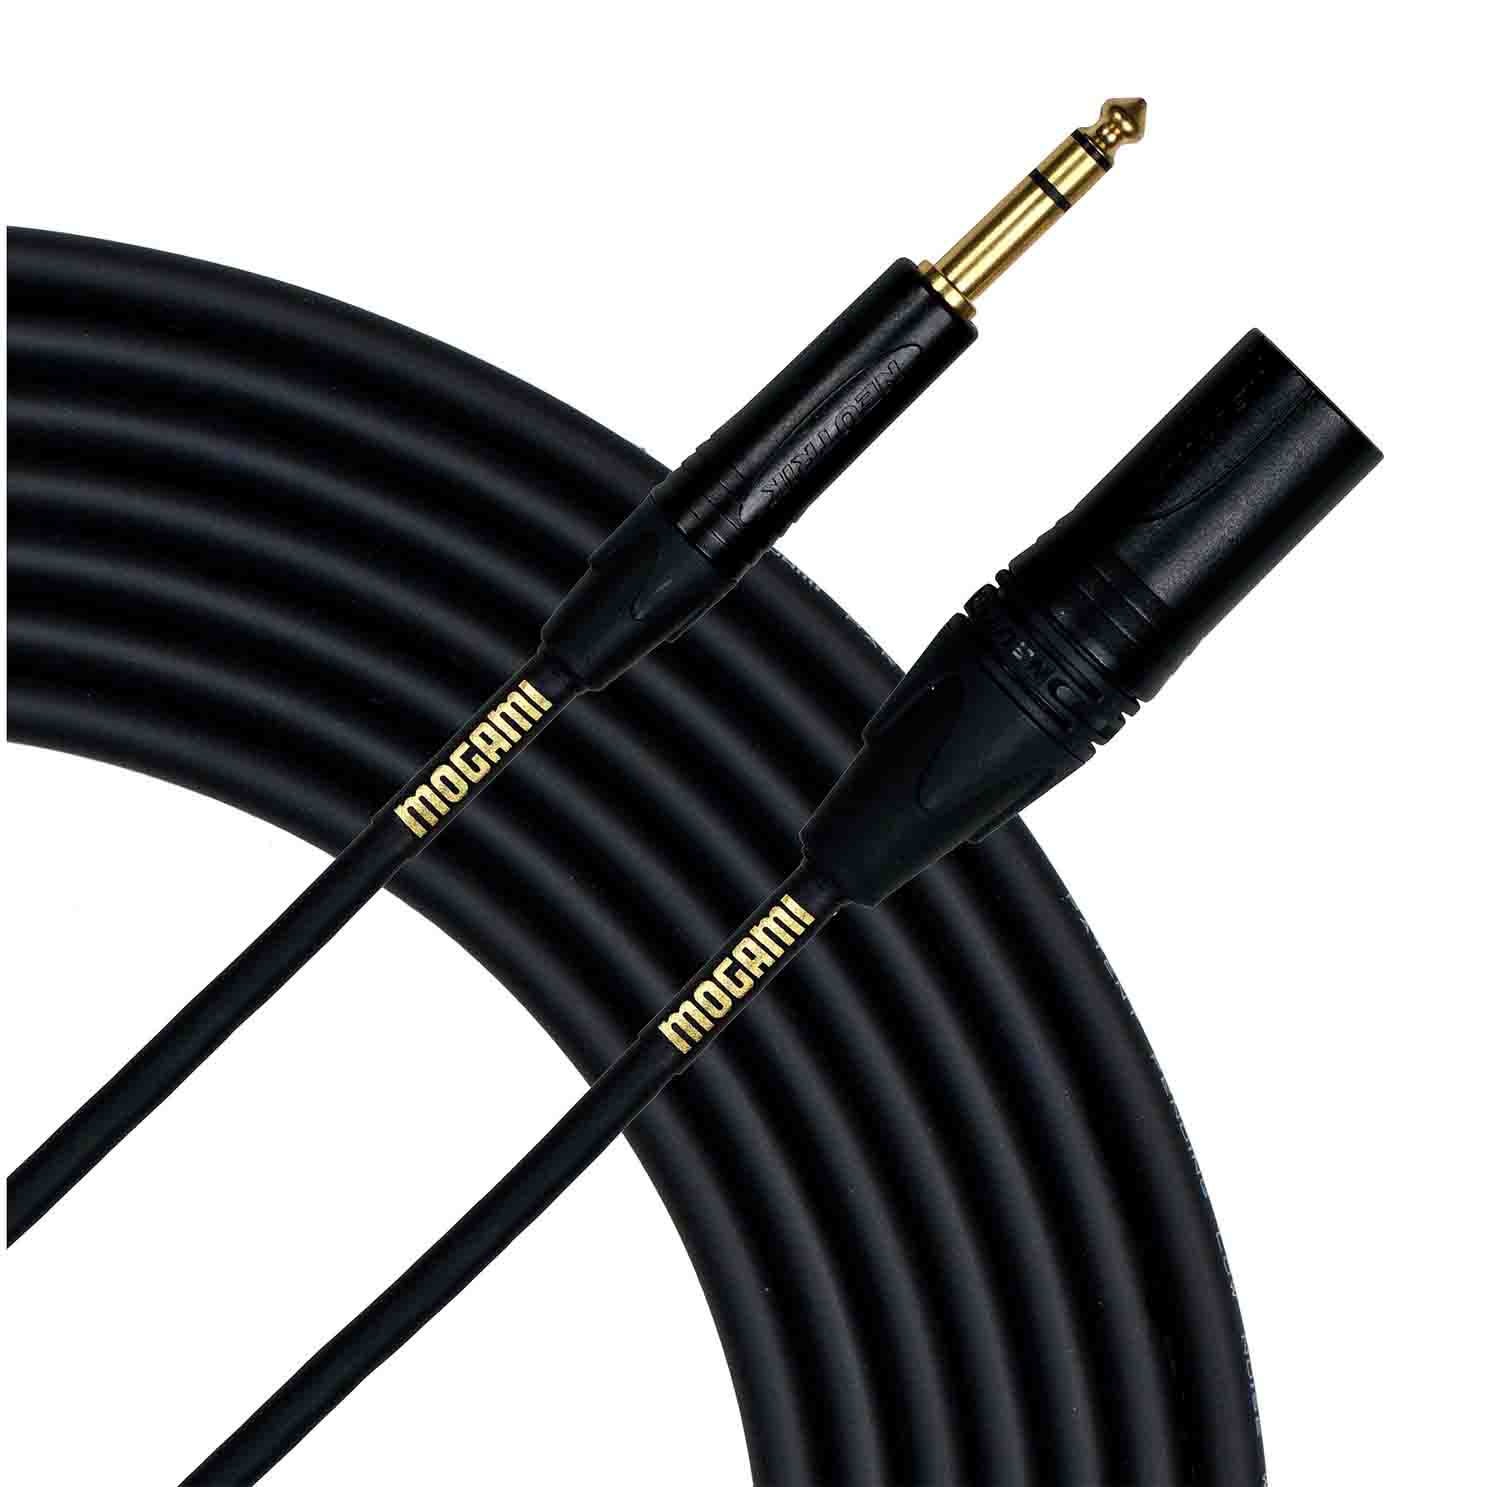 Mogami GOLD-TRSXLRM-20, ¼-Inch TRS Male to XLR Male Balanced Patch Cable - 20 Foot - Hollywood DJ